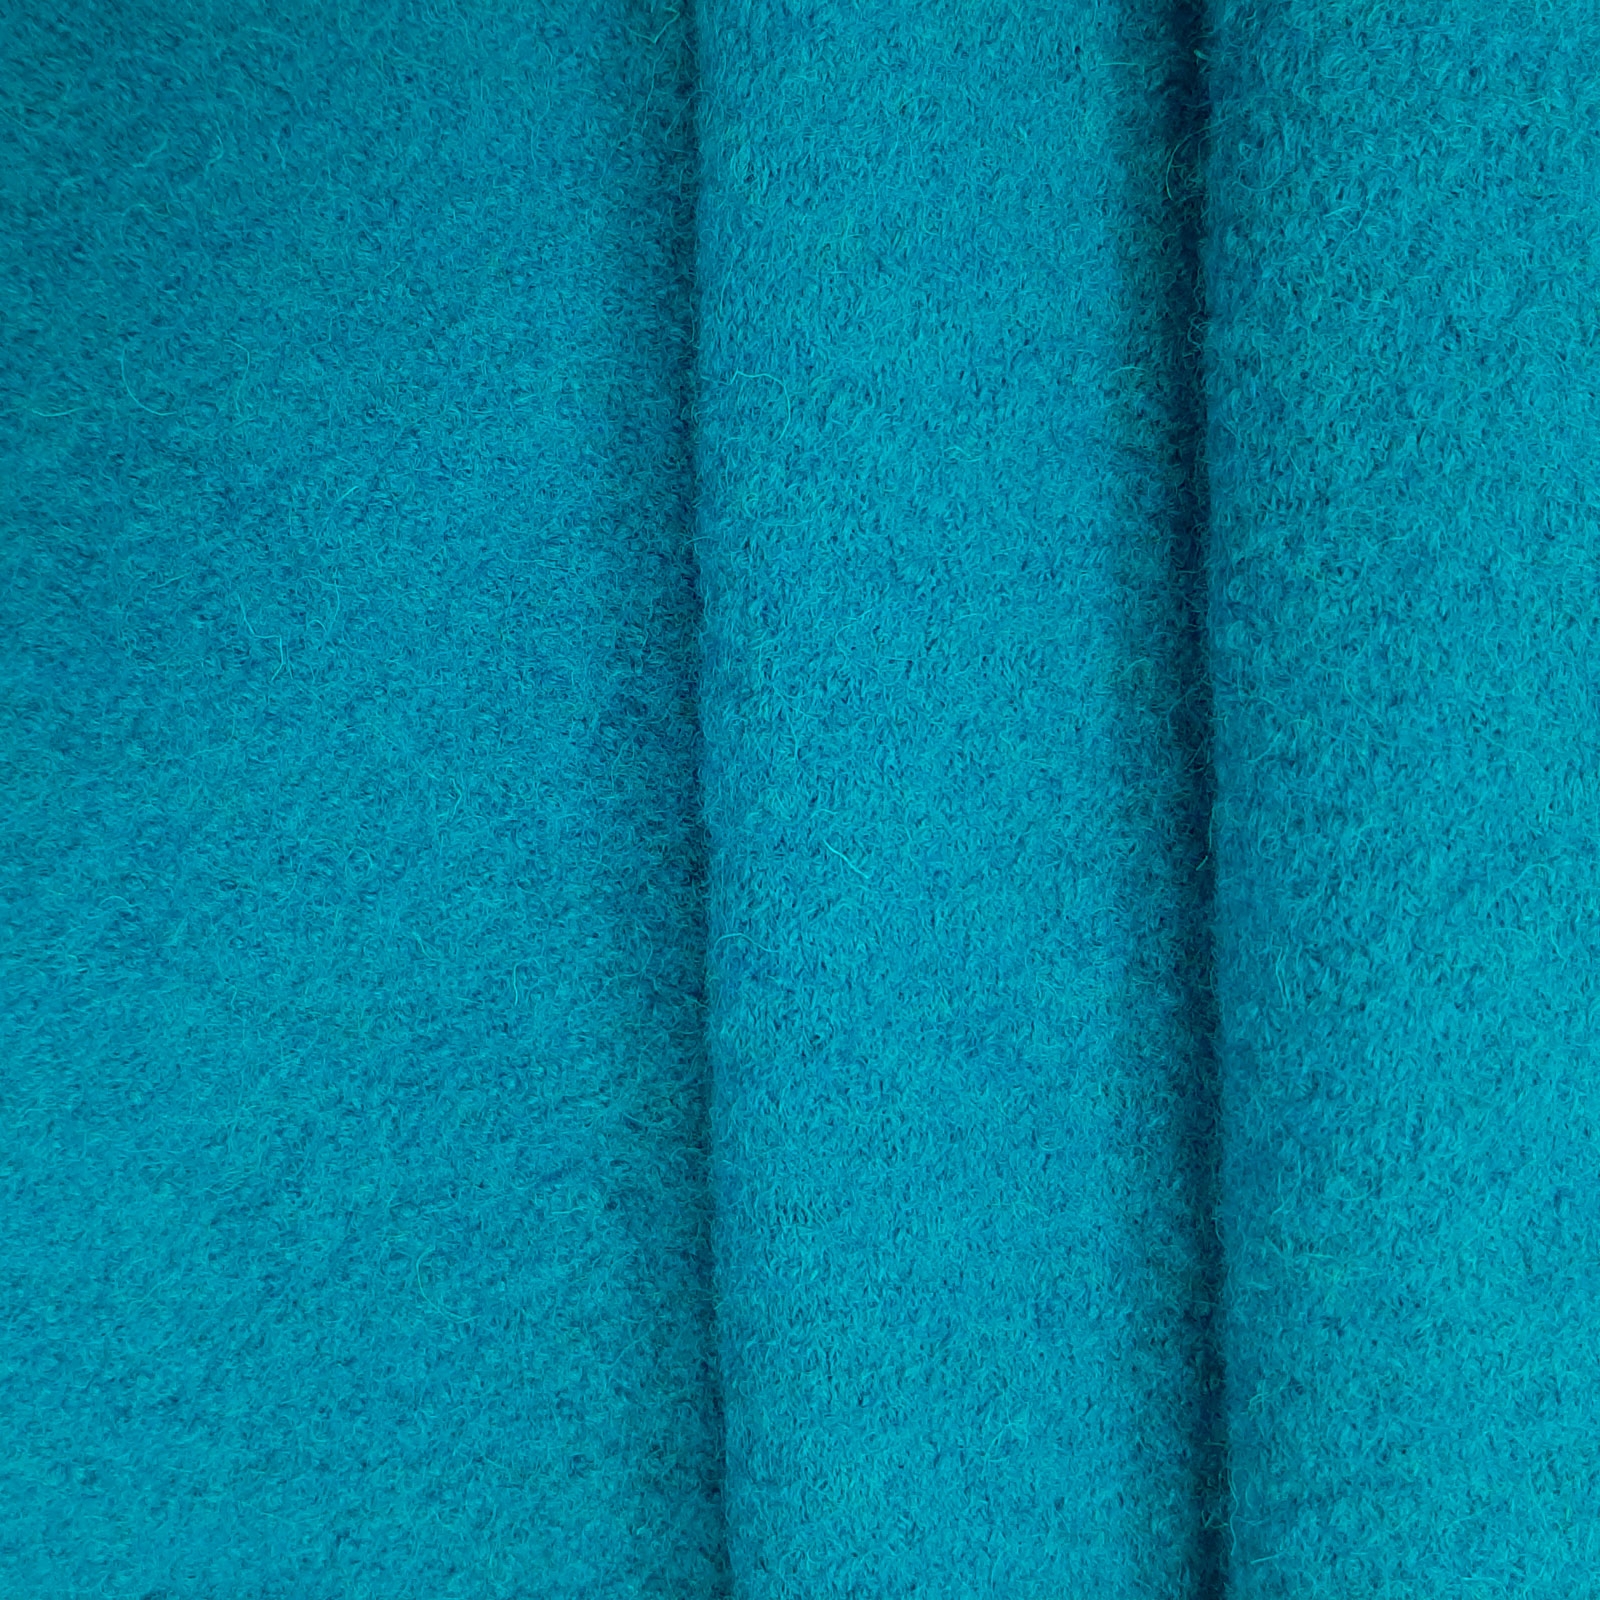 FAVORIT Walkloden - boiled wool / loden - turquoise